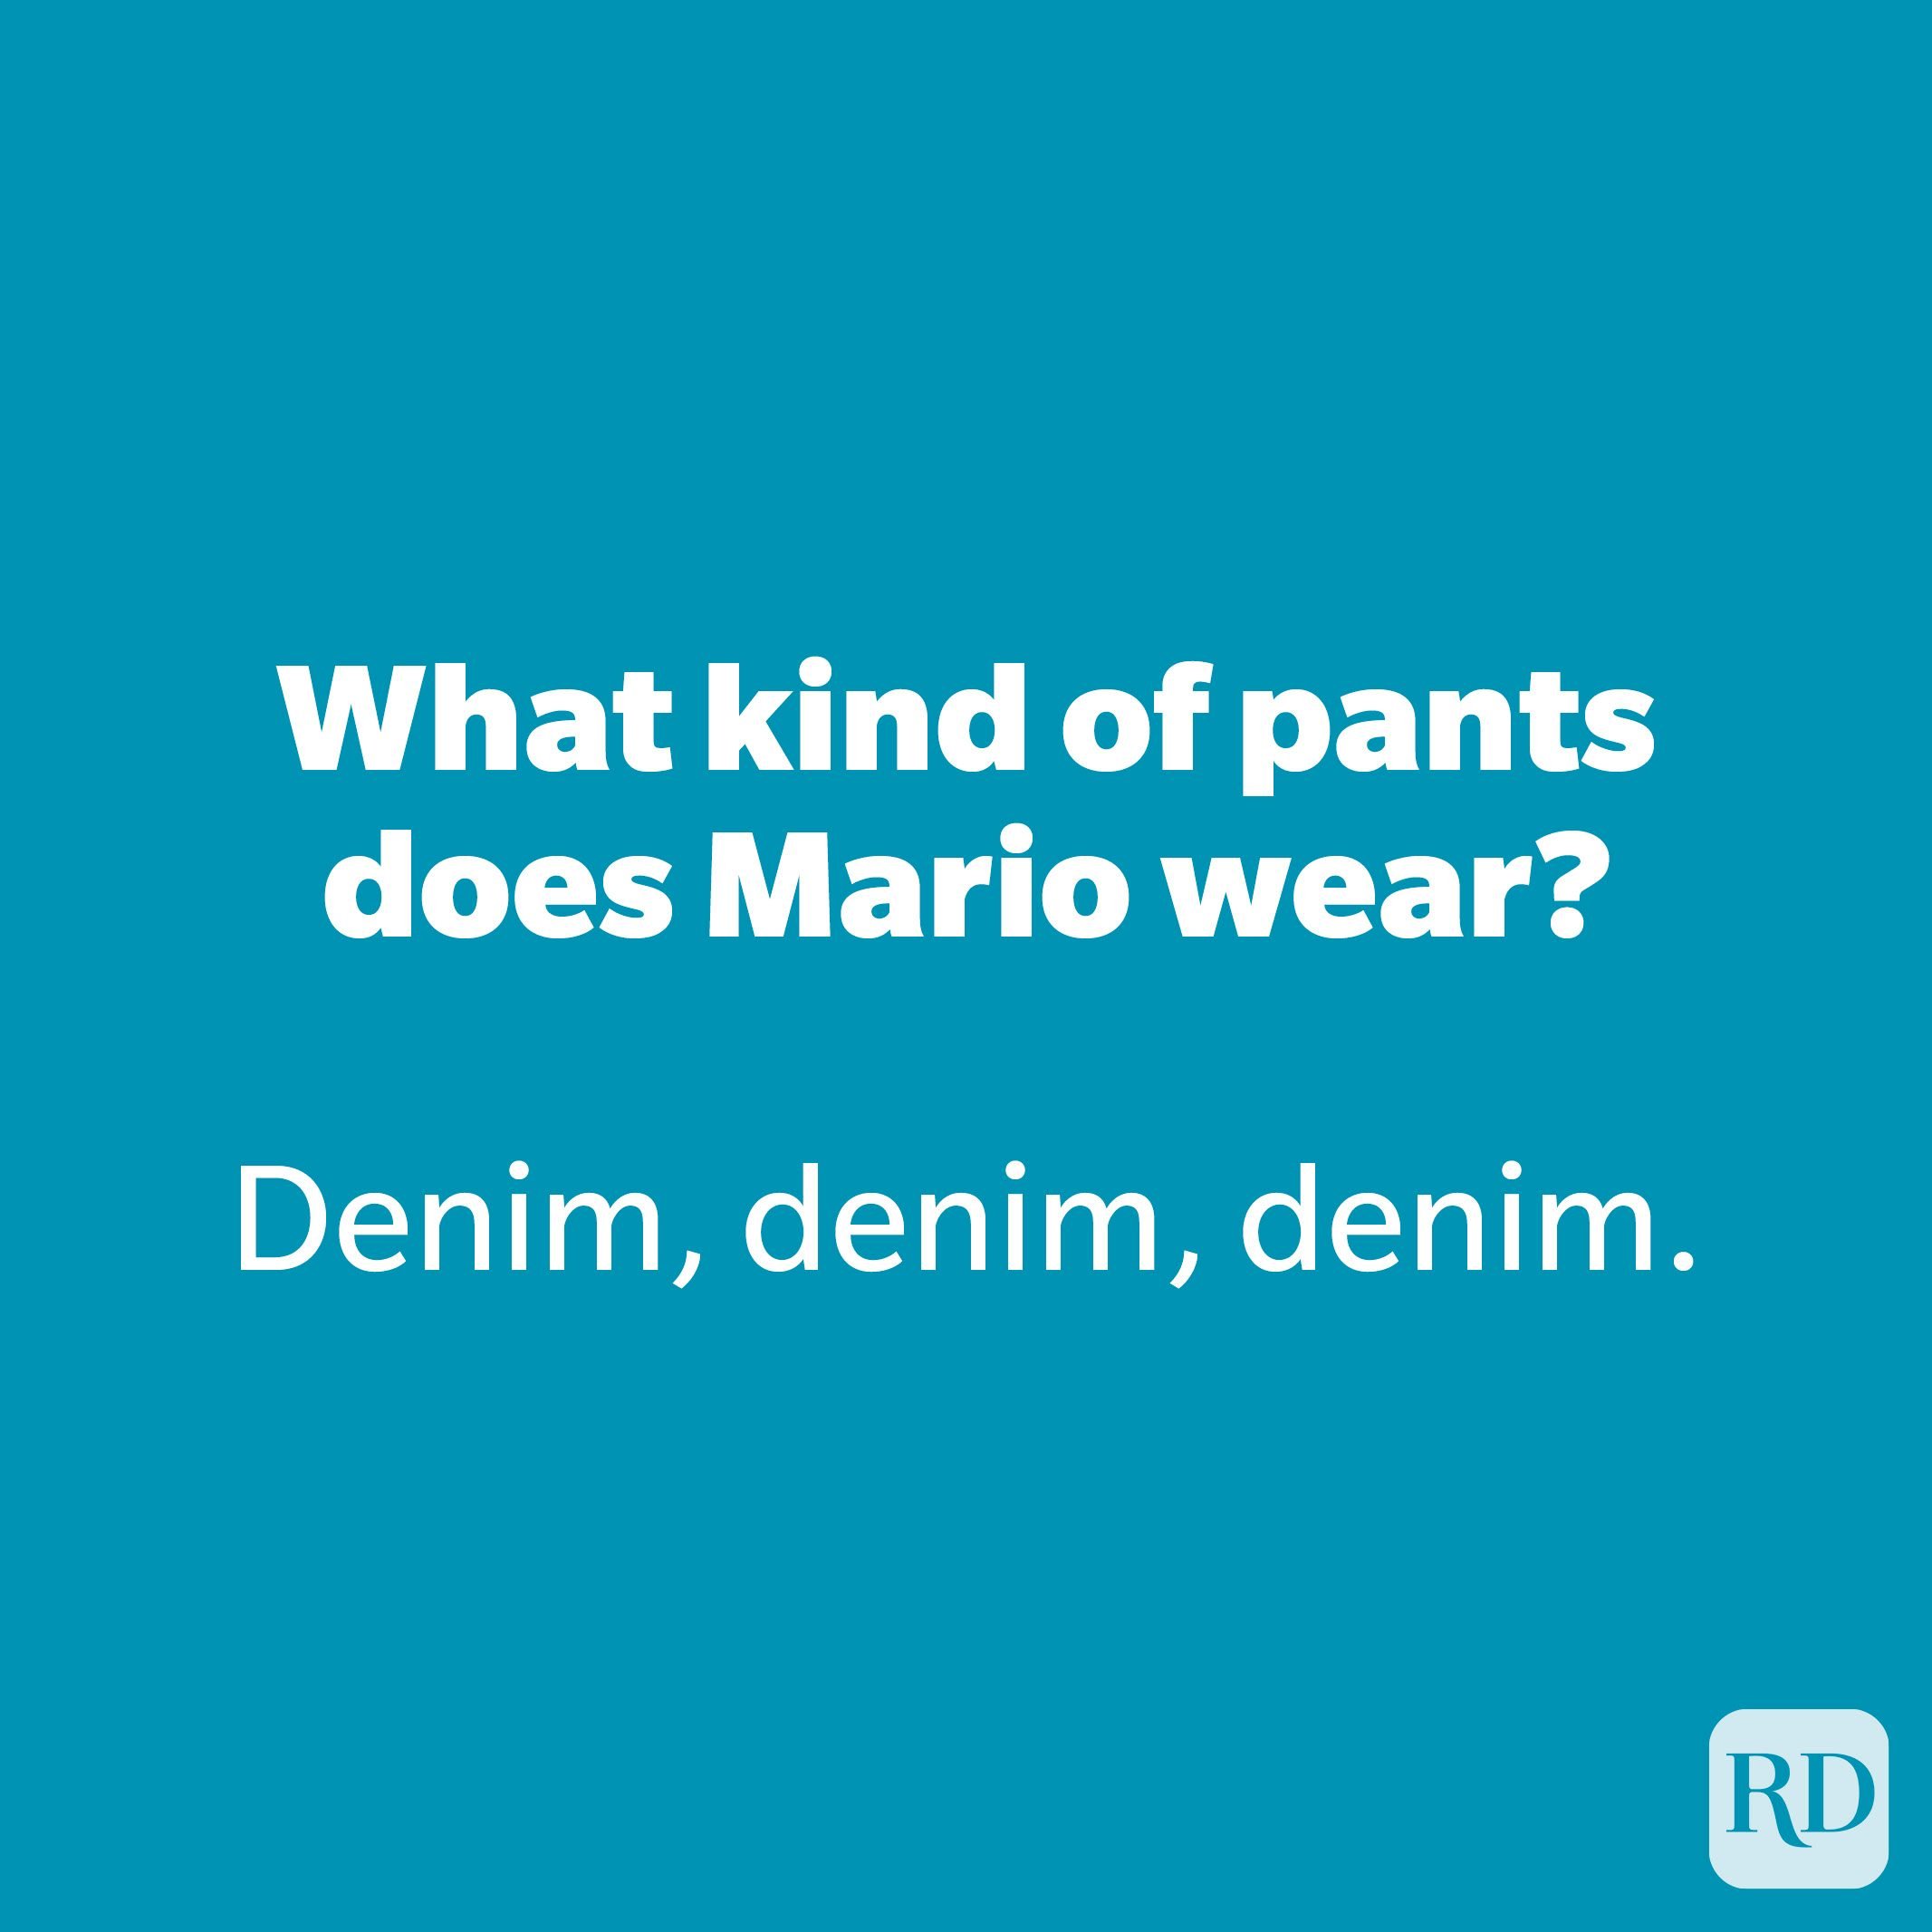 What kind of pants does Mario wear?